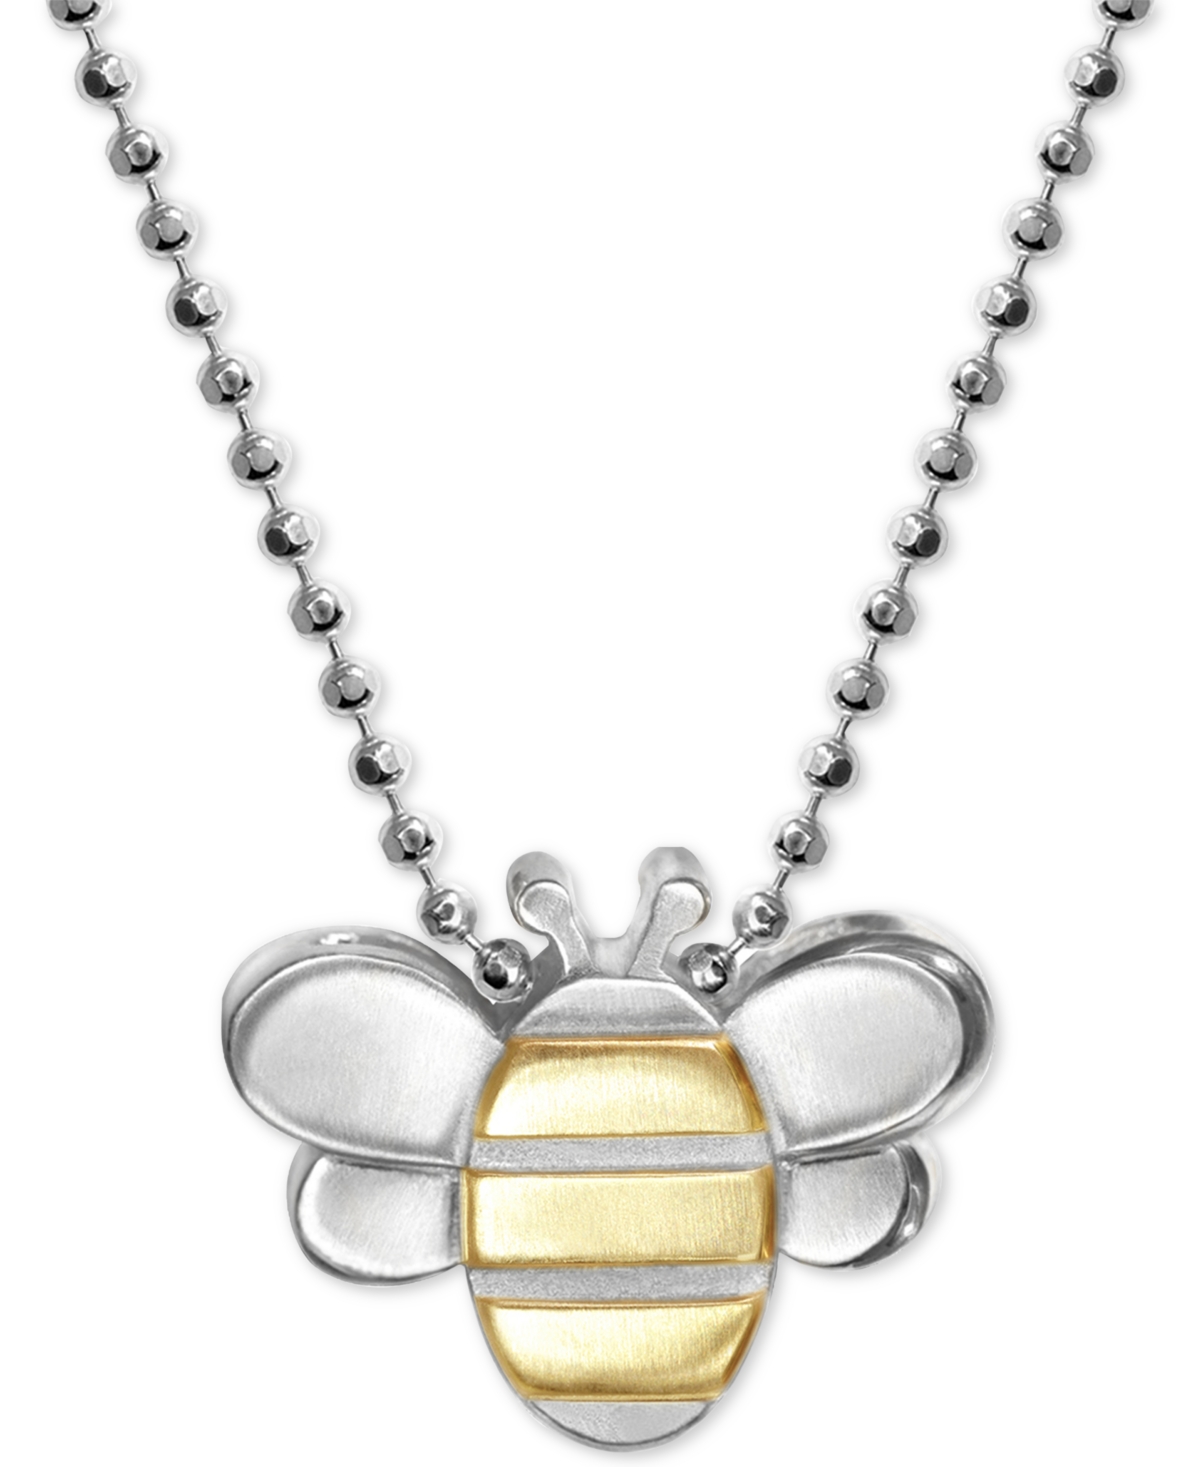 Bumble Bee 16" Pendant Necklace in Sterling Silver & 18k Gold - Silver